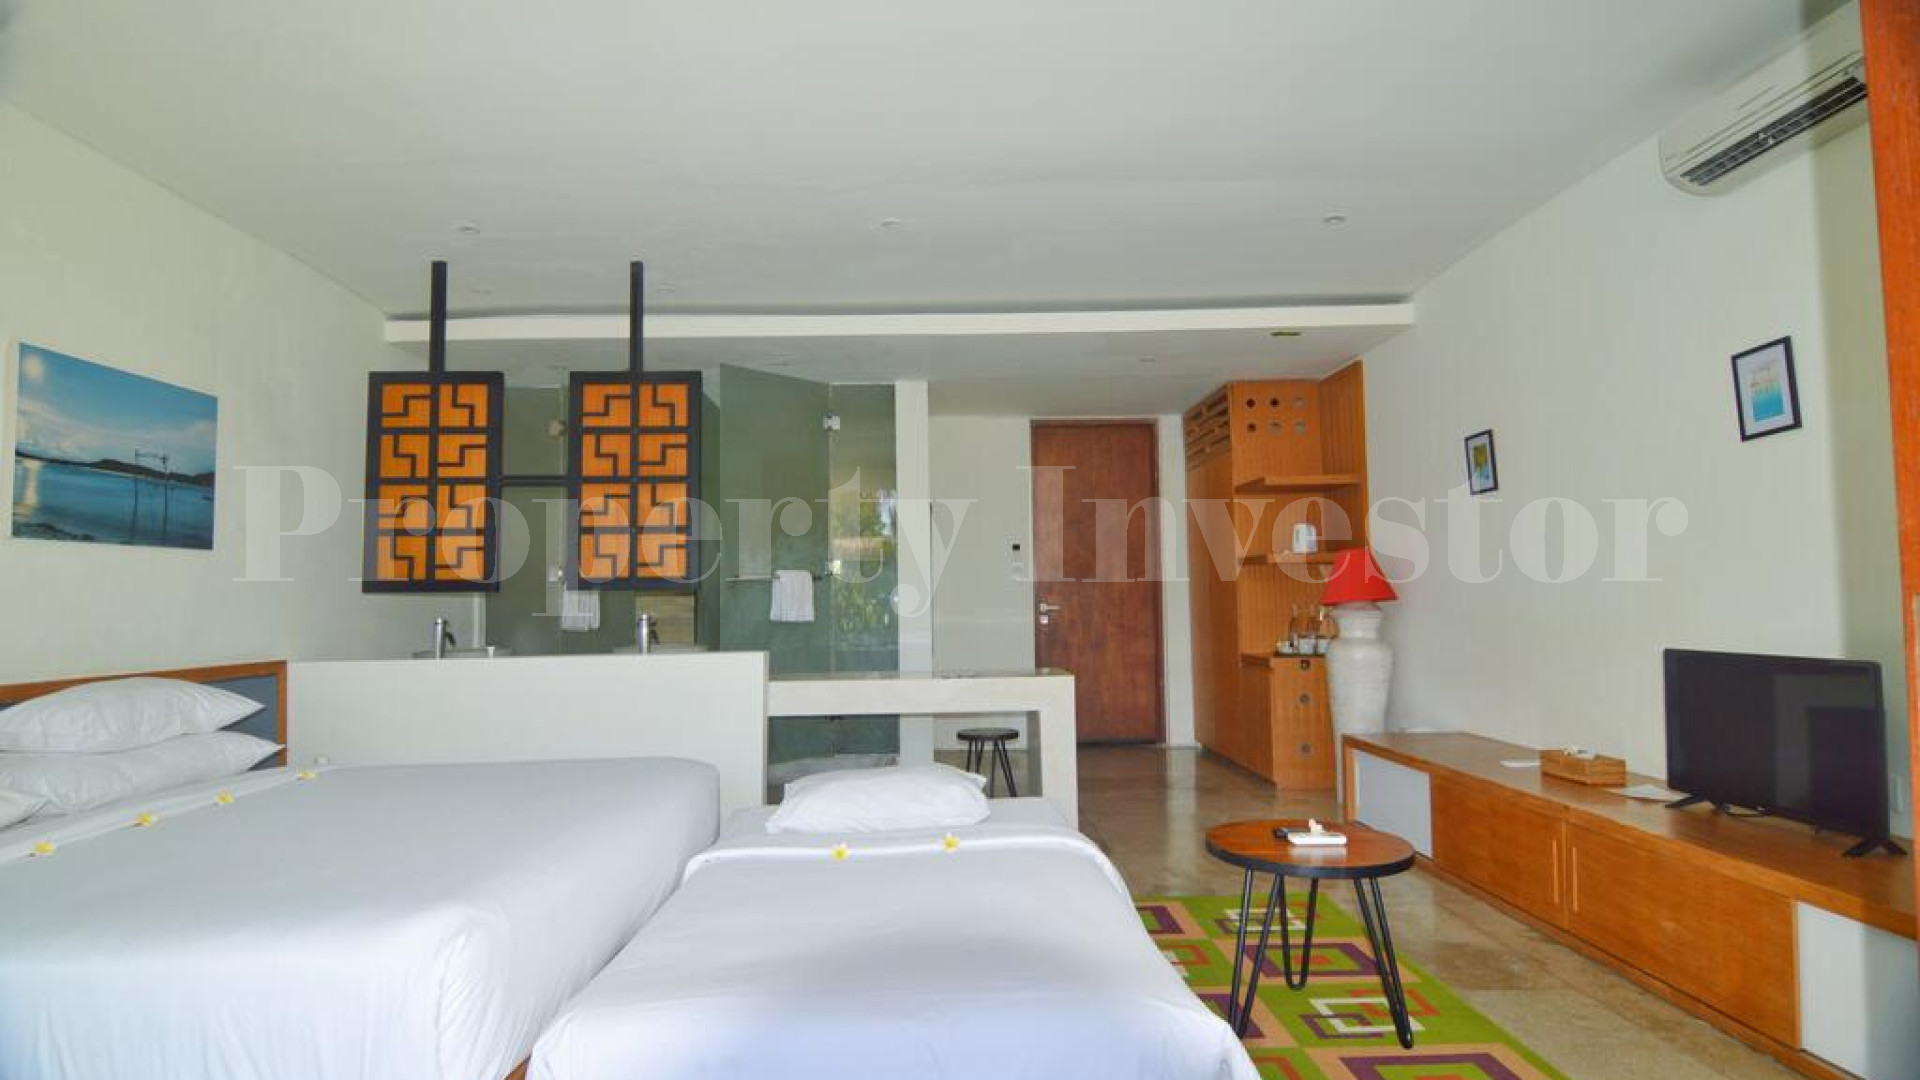 33 Room Boutique Hotel with Ready Expansion Plan for Sale in Lombok, Indonesia